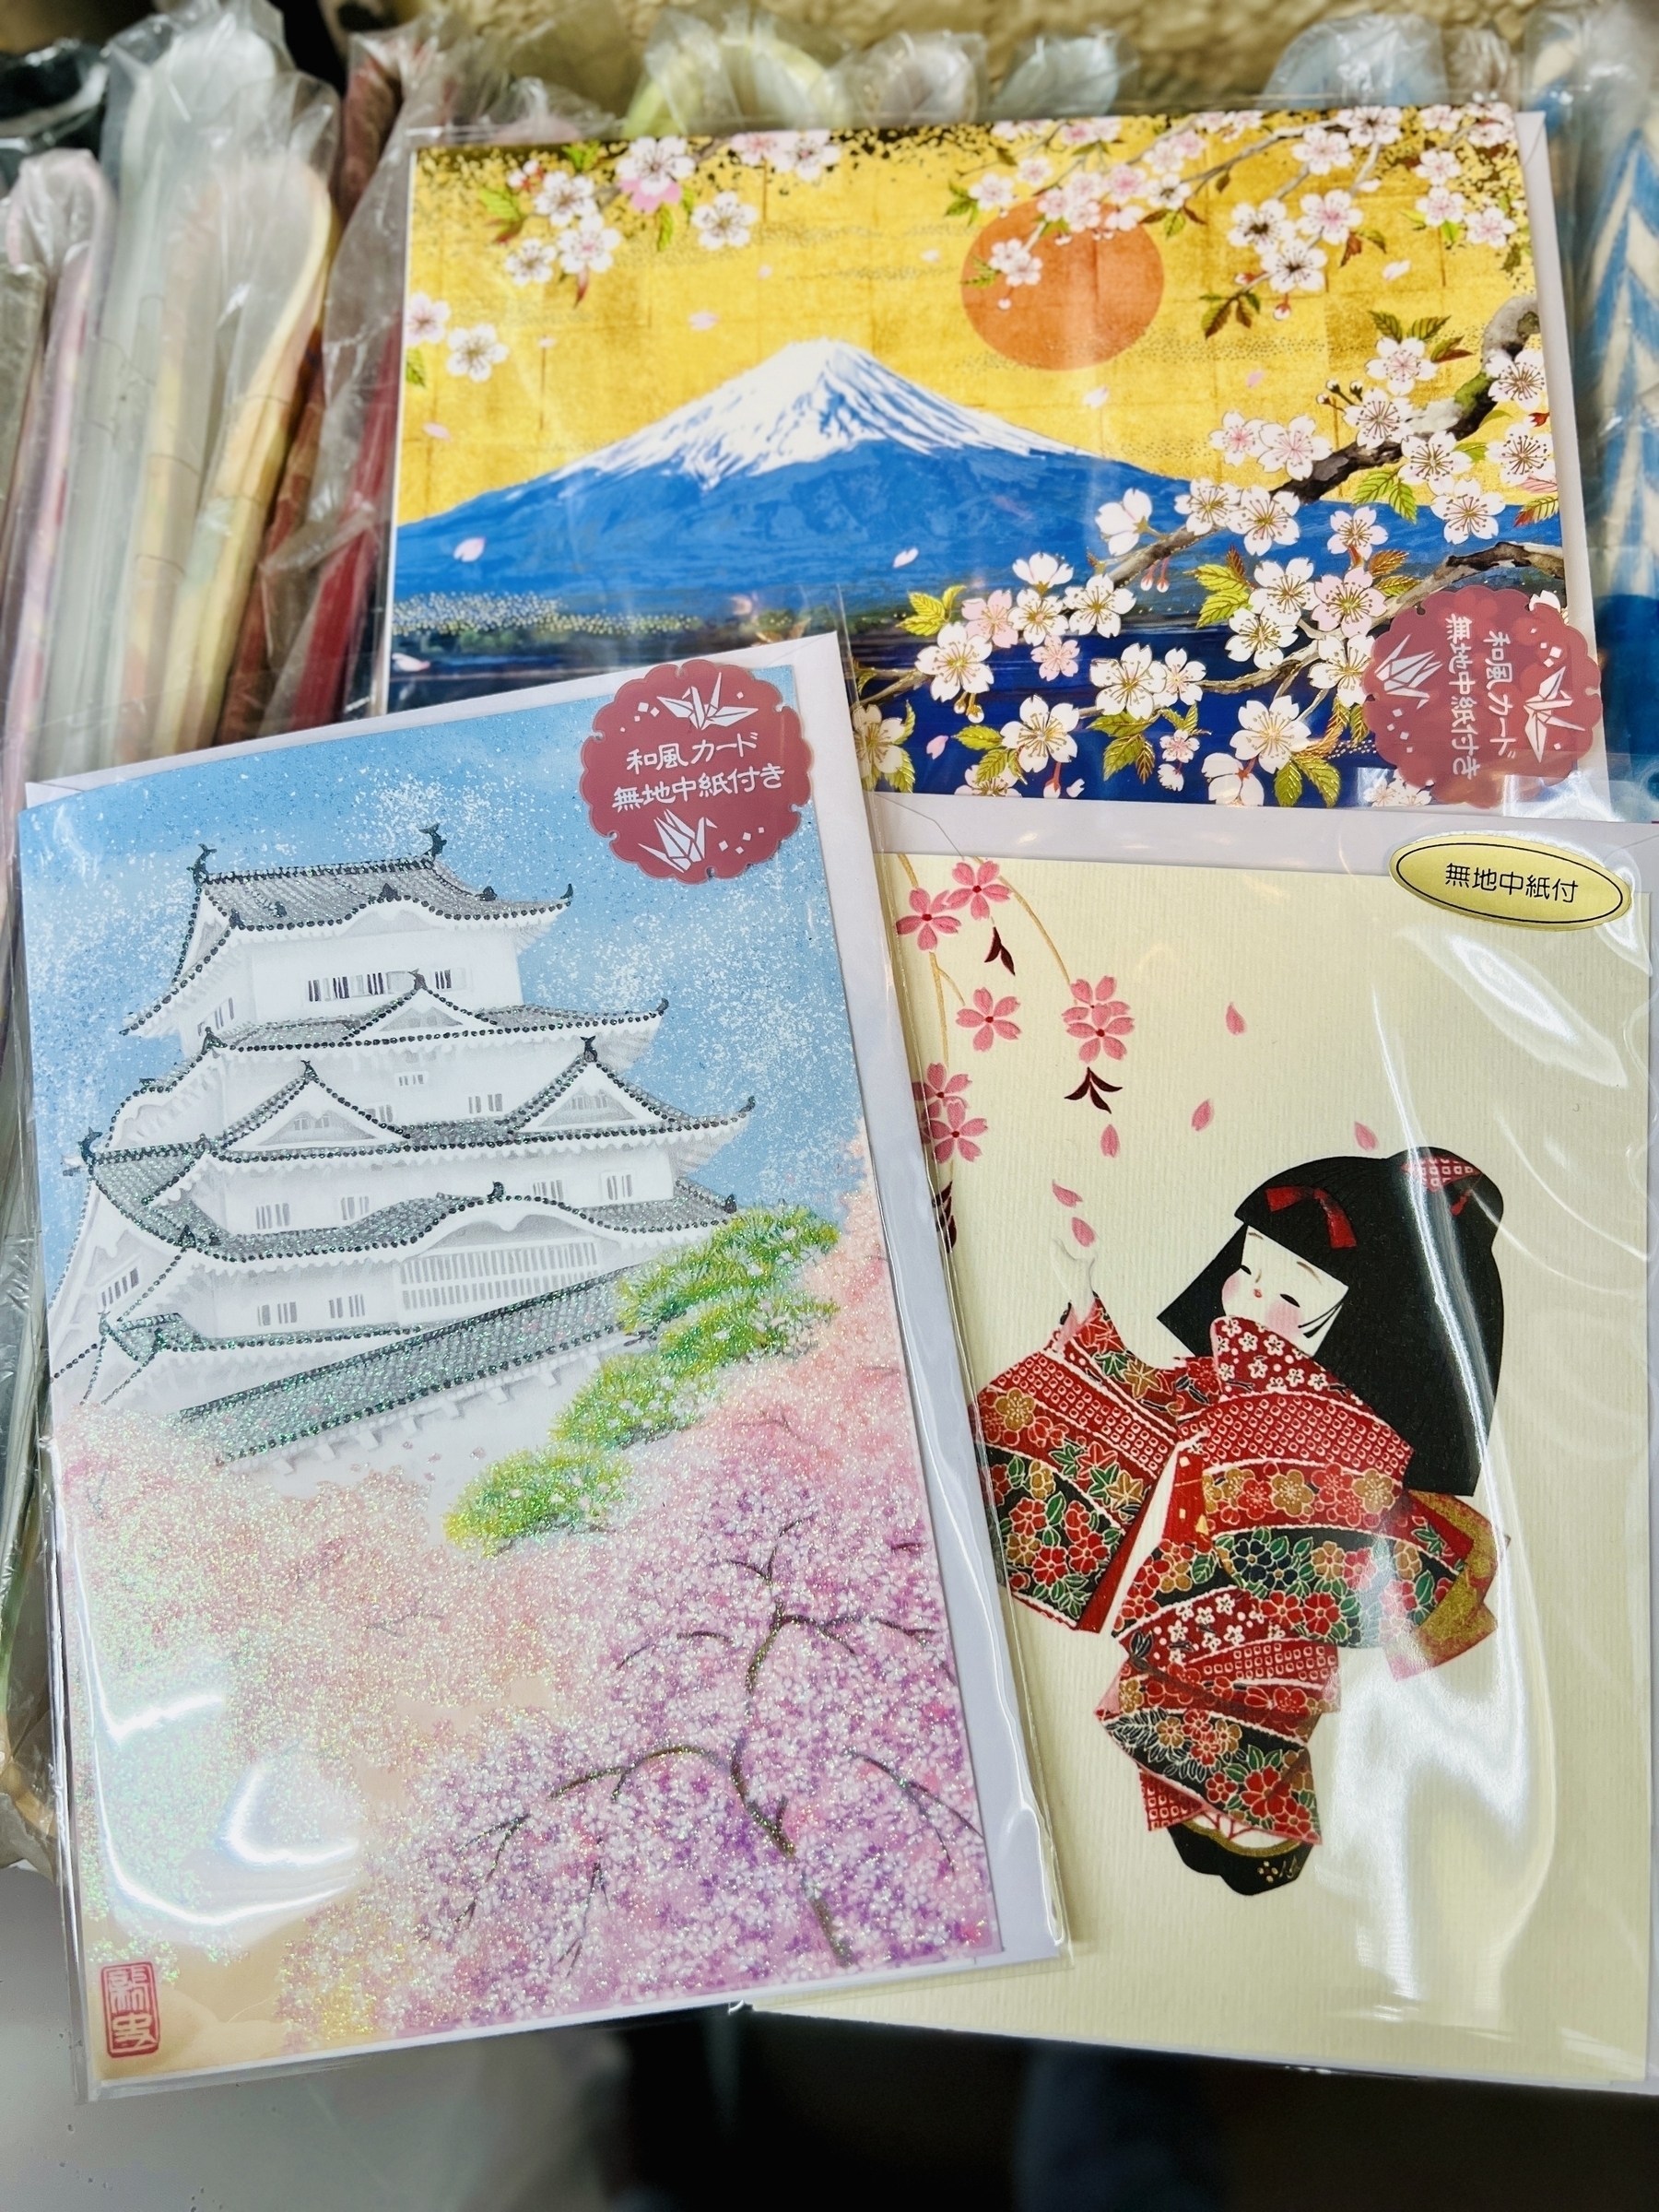 3 greeting cards: One depicts Mt Fuji with cherry blossom trees in the foreground. Another is cherry blossoms with Himeji Castle in the background. The third is a kokeshi like doll-girl reaching up to catch falling sakura petals